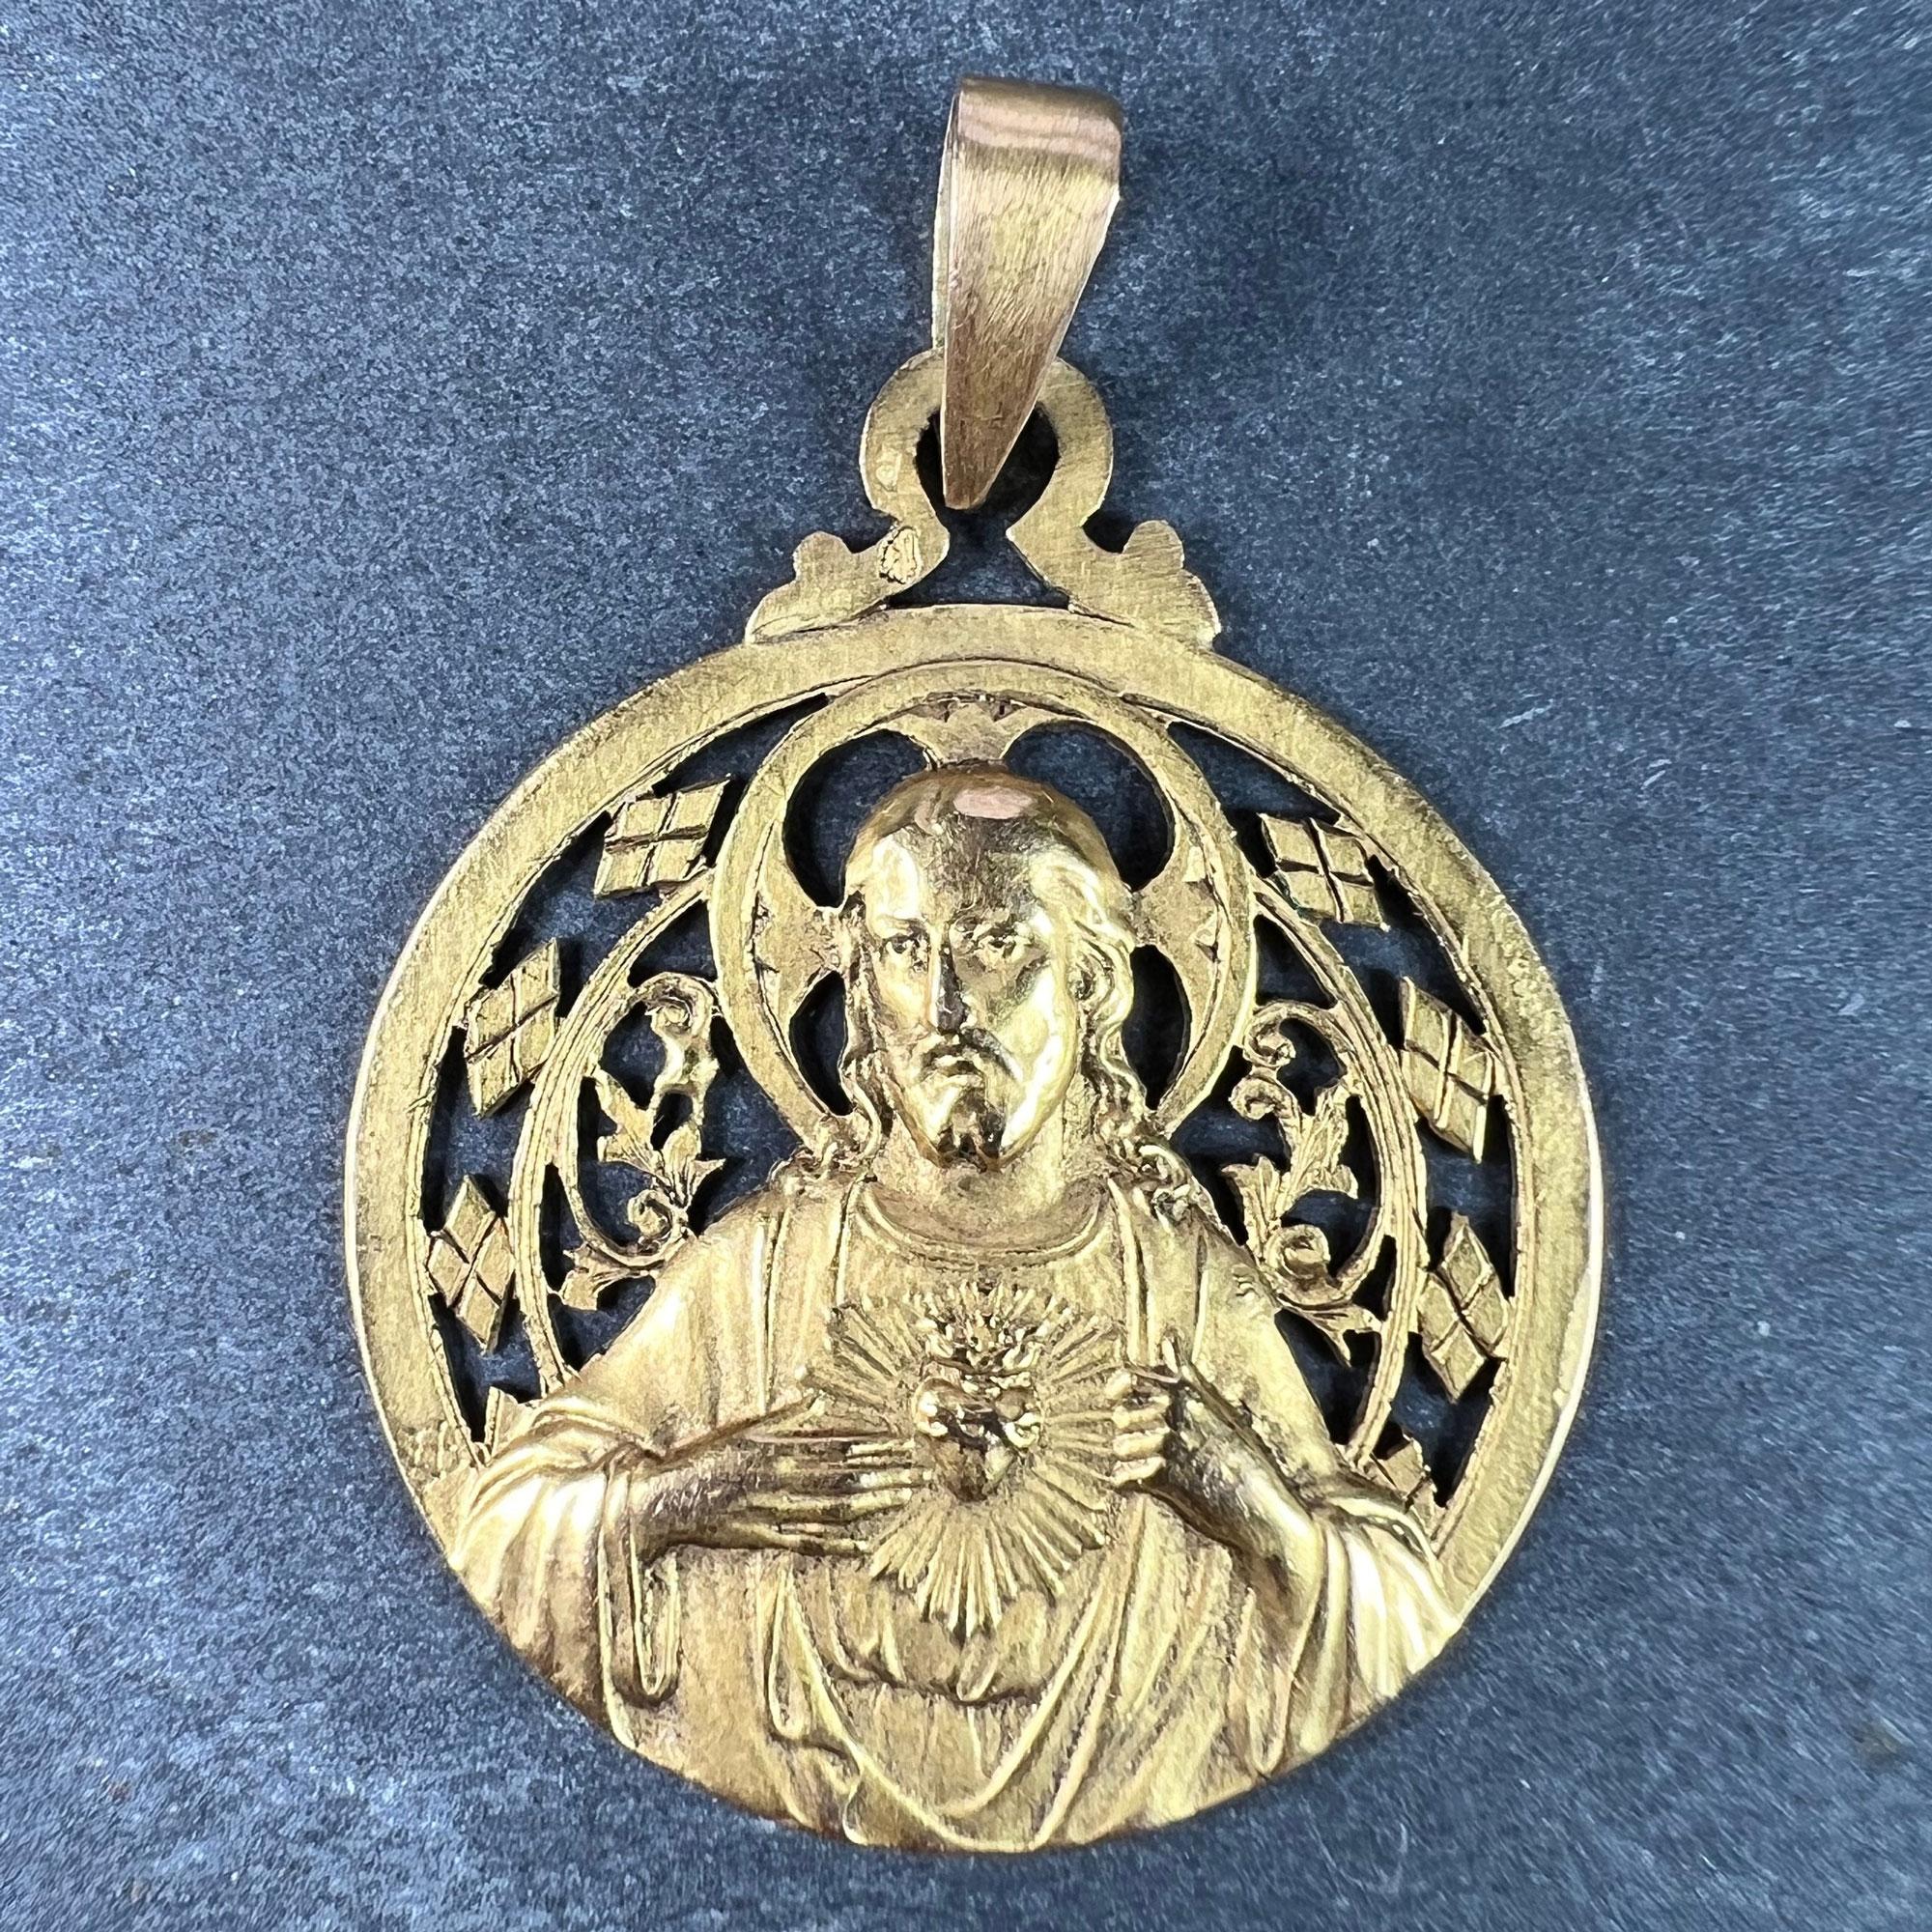 A French 18 karat (18K) yellow gold charm pendant designed as a round medal with a relief of Jesus Christ with the Sacred Heart with a pierced surround of diamonds and plant motifs surrounding His halo. Signed A Lavrillier for Andre Lavrillier